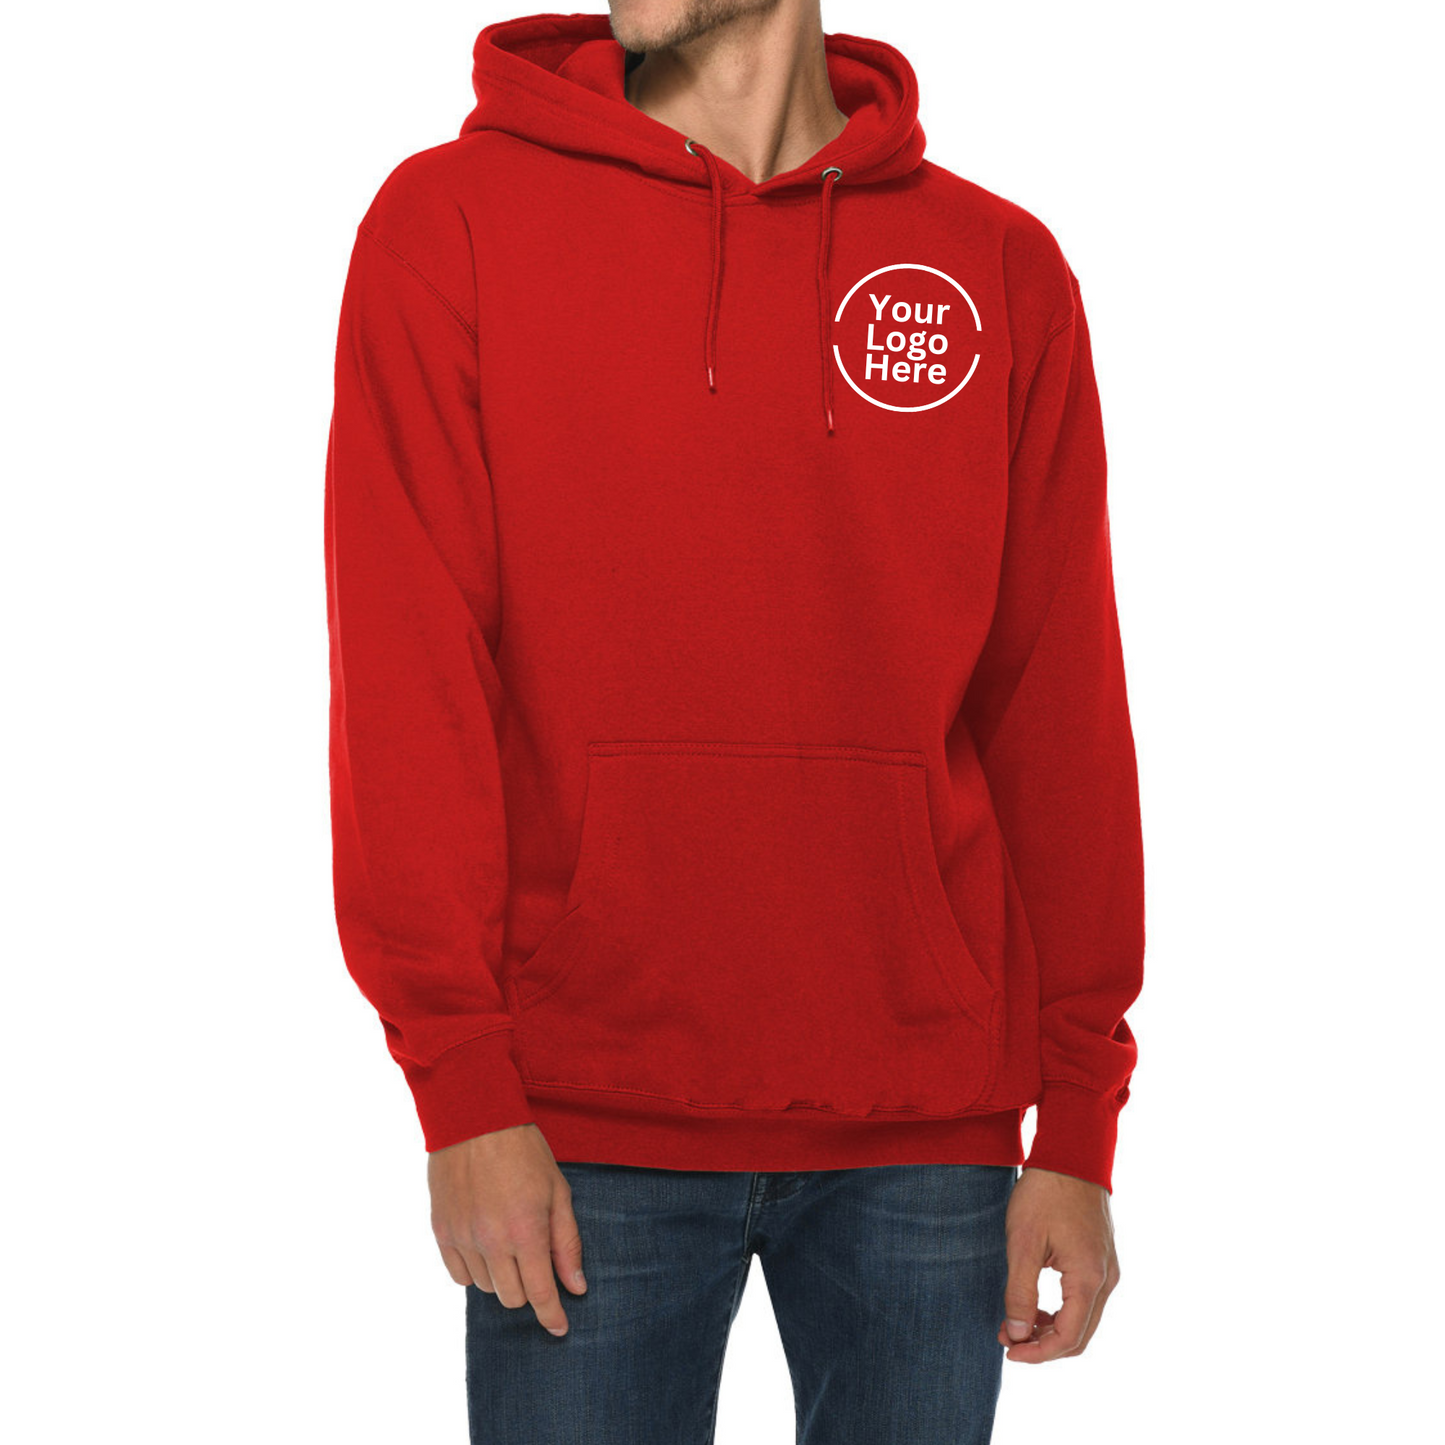 DesignDash - Embroidered Hoodie Four Pack